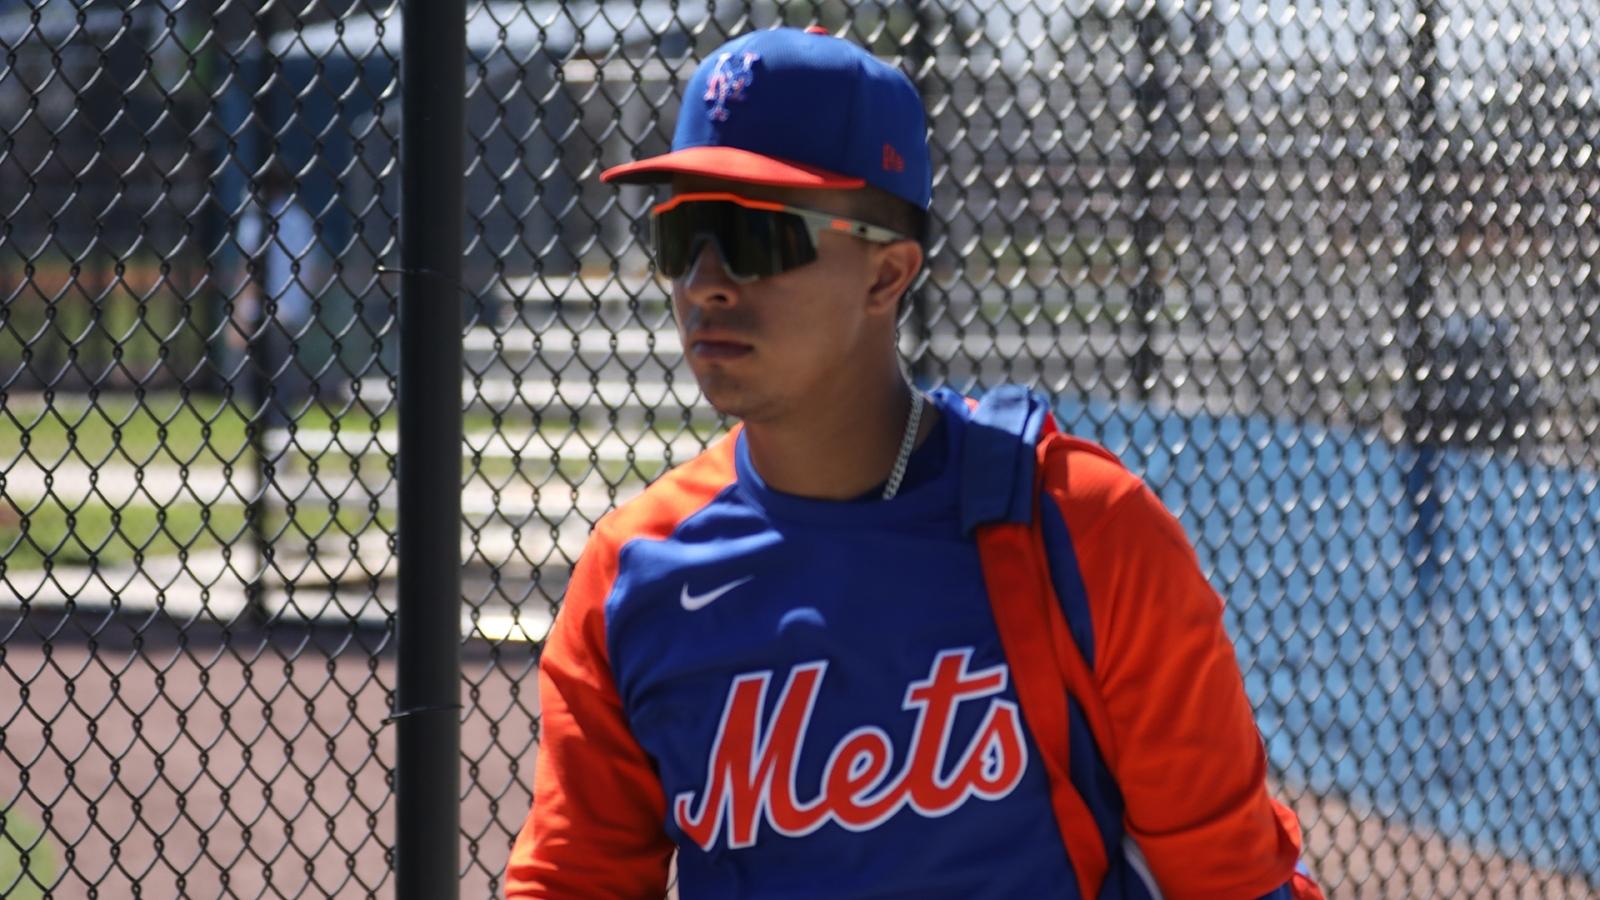 Mets prospect Mark Vientos walking with bag at 2021 spring training in Port St. Lucie, Fla. / Rob Carbuccia/SNY